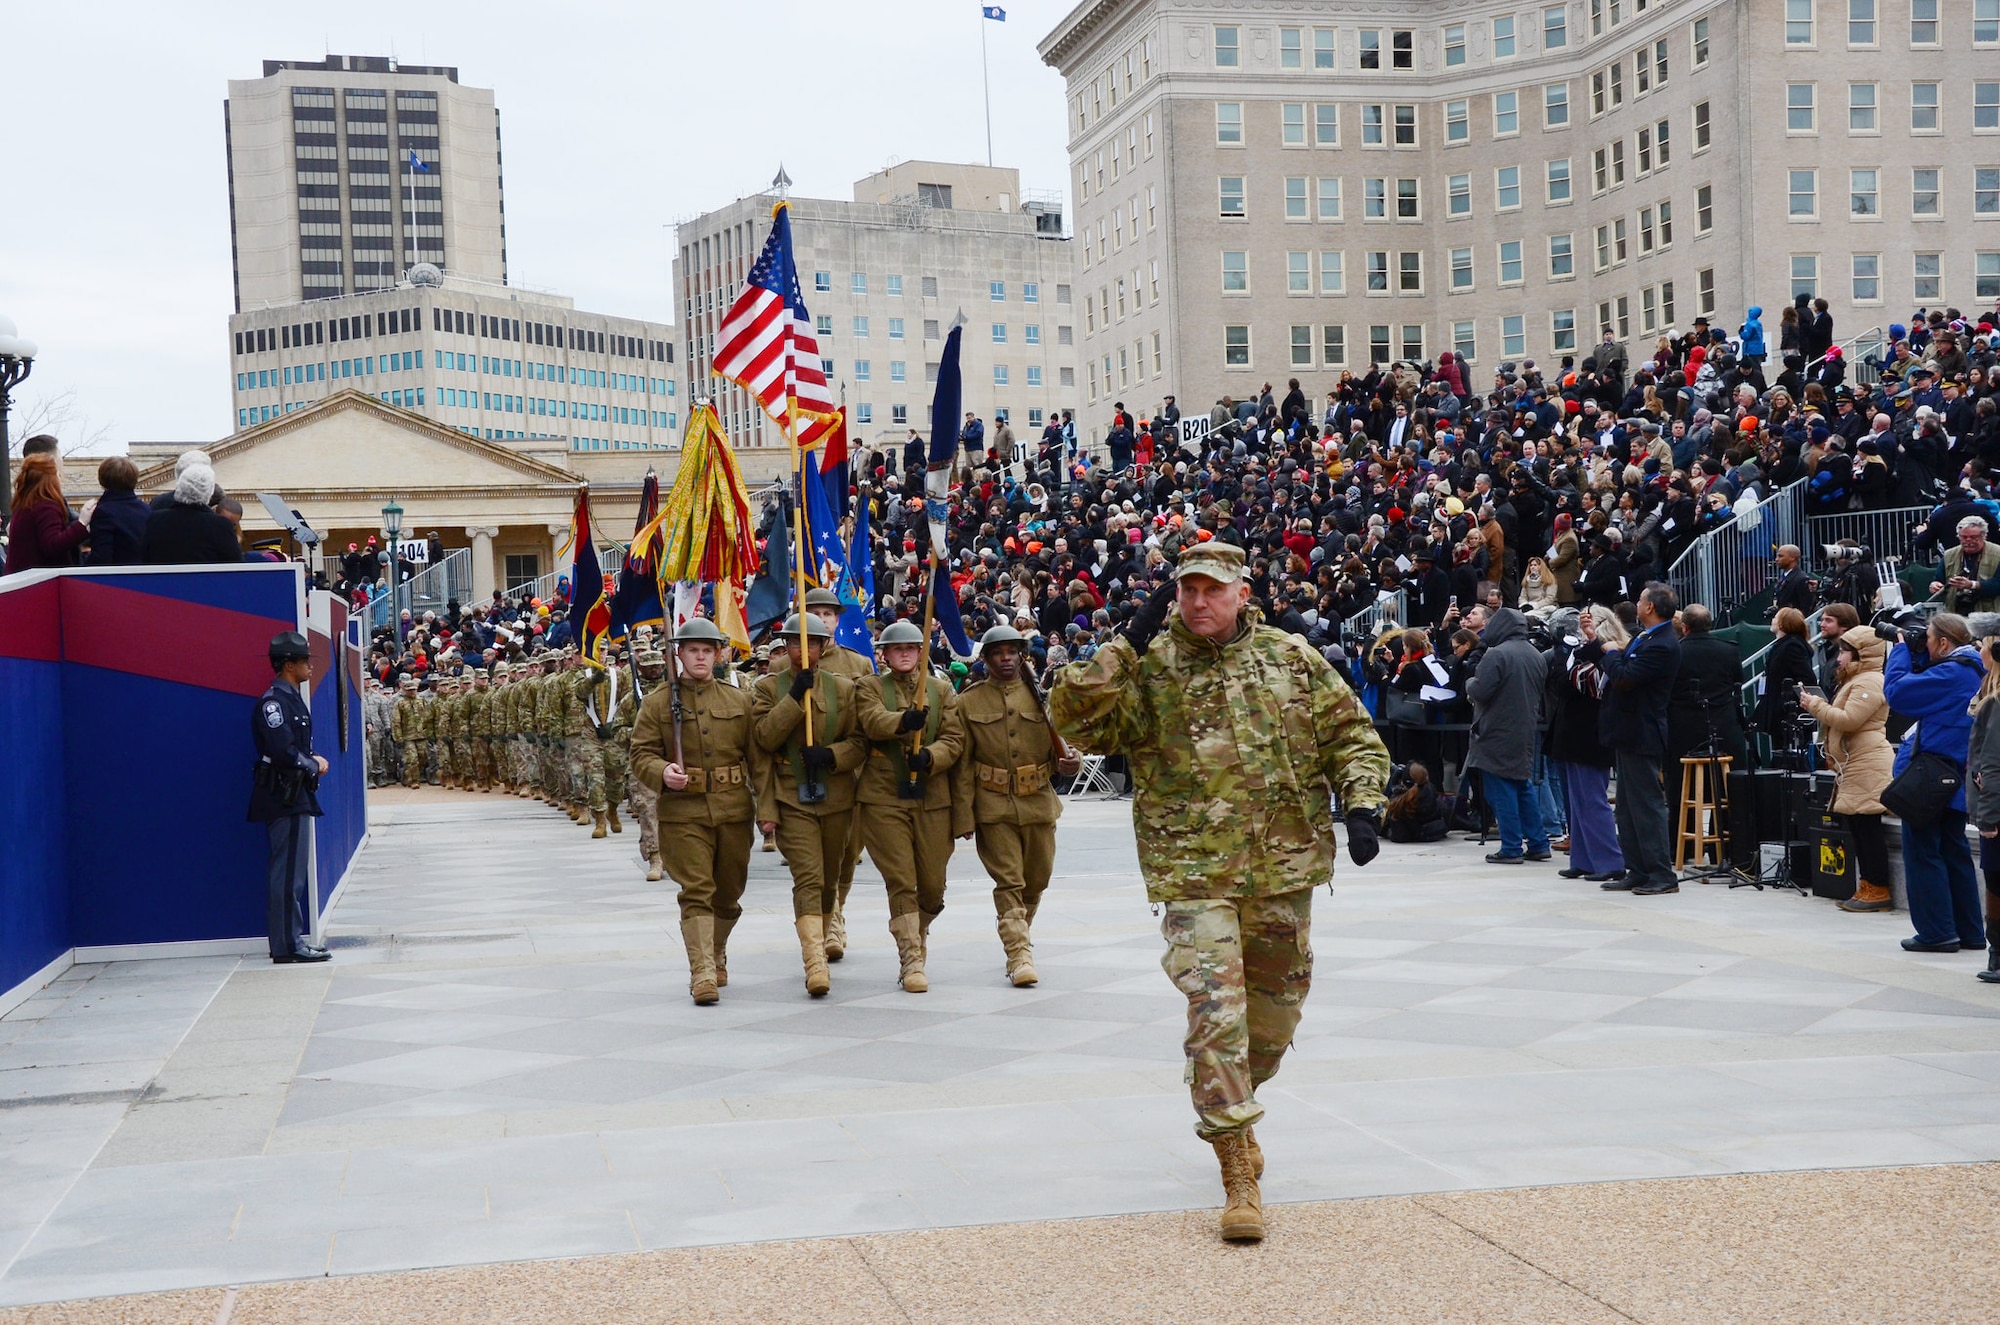 Virginia National Guard Soldiers and Airmen lead the parade at the inauguration of Dr. Ralph Northam as the 73rd governor of Virginia Jan. 13, 2018, in Richmond, Virginia. More than 200 Virginia National Guard and Virginia Defense Force personnel will support the inauguration of Glenn Youngkin as the 74th governor of Virginia in the state capital Jan. 15, 2022.